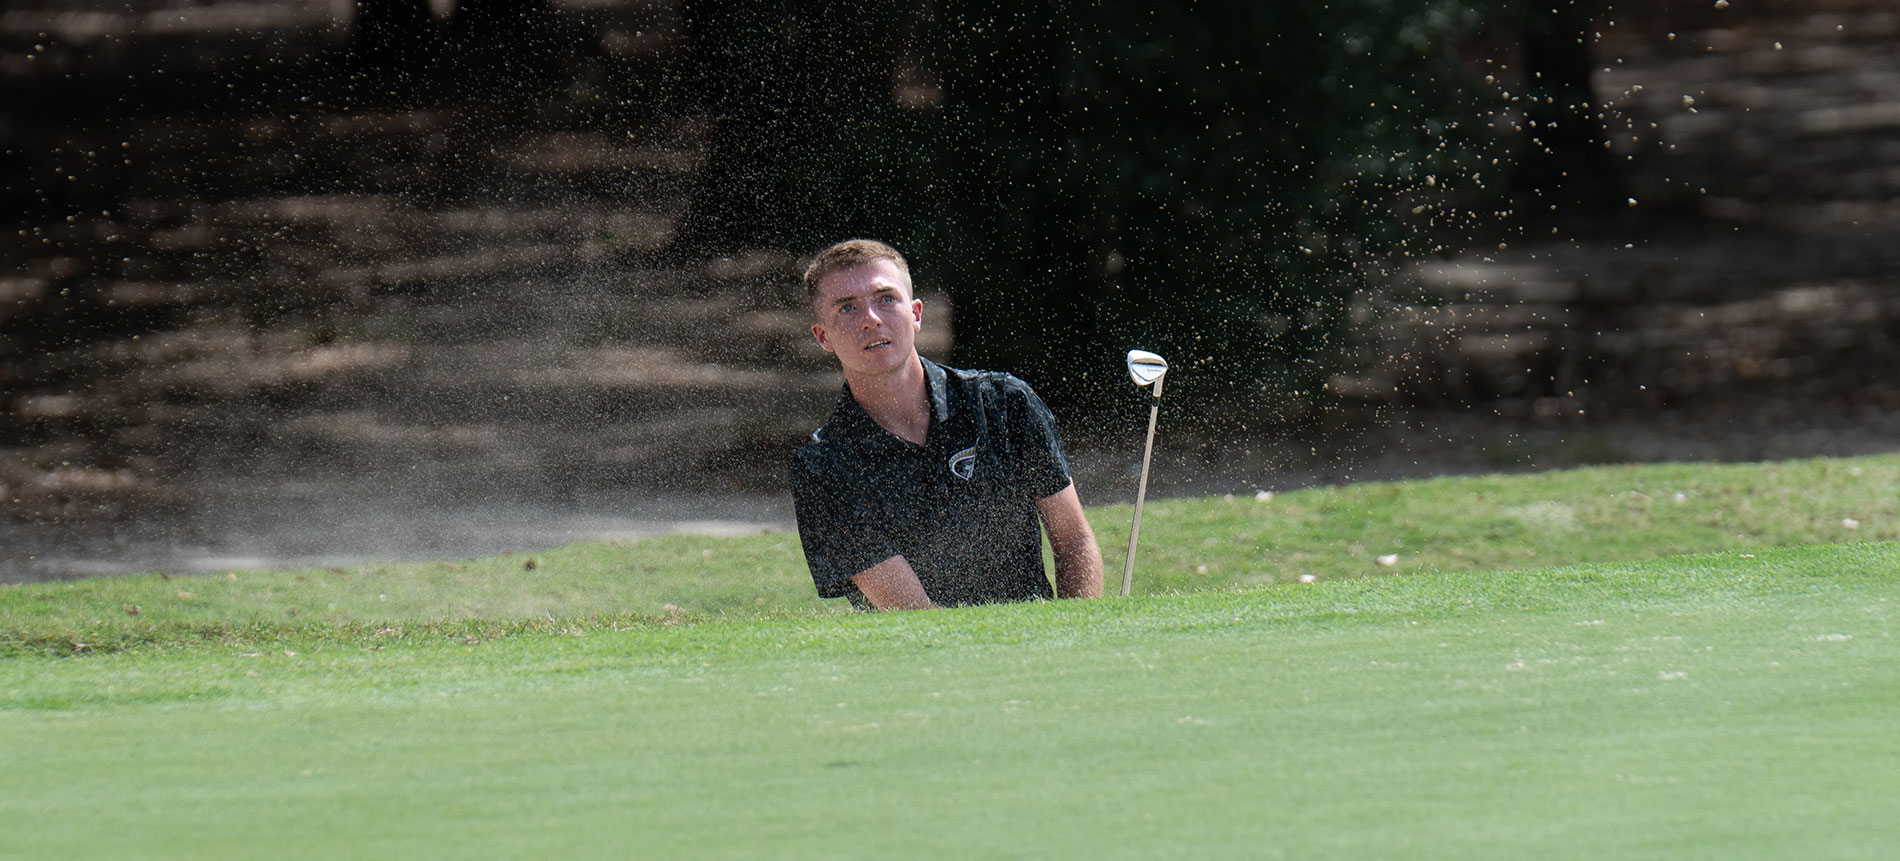 Men’s Golf in Seventh Place Midway Through Second Round at Camden Collegiate; Play Suspended Due to Weather